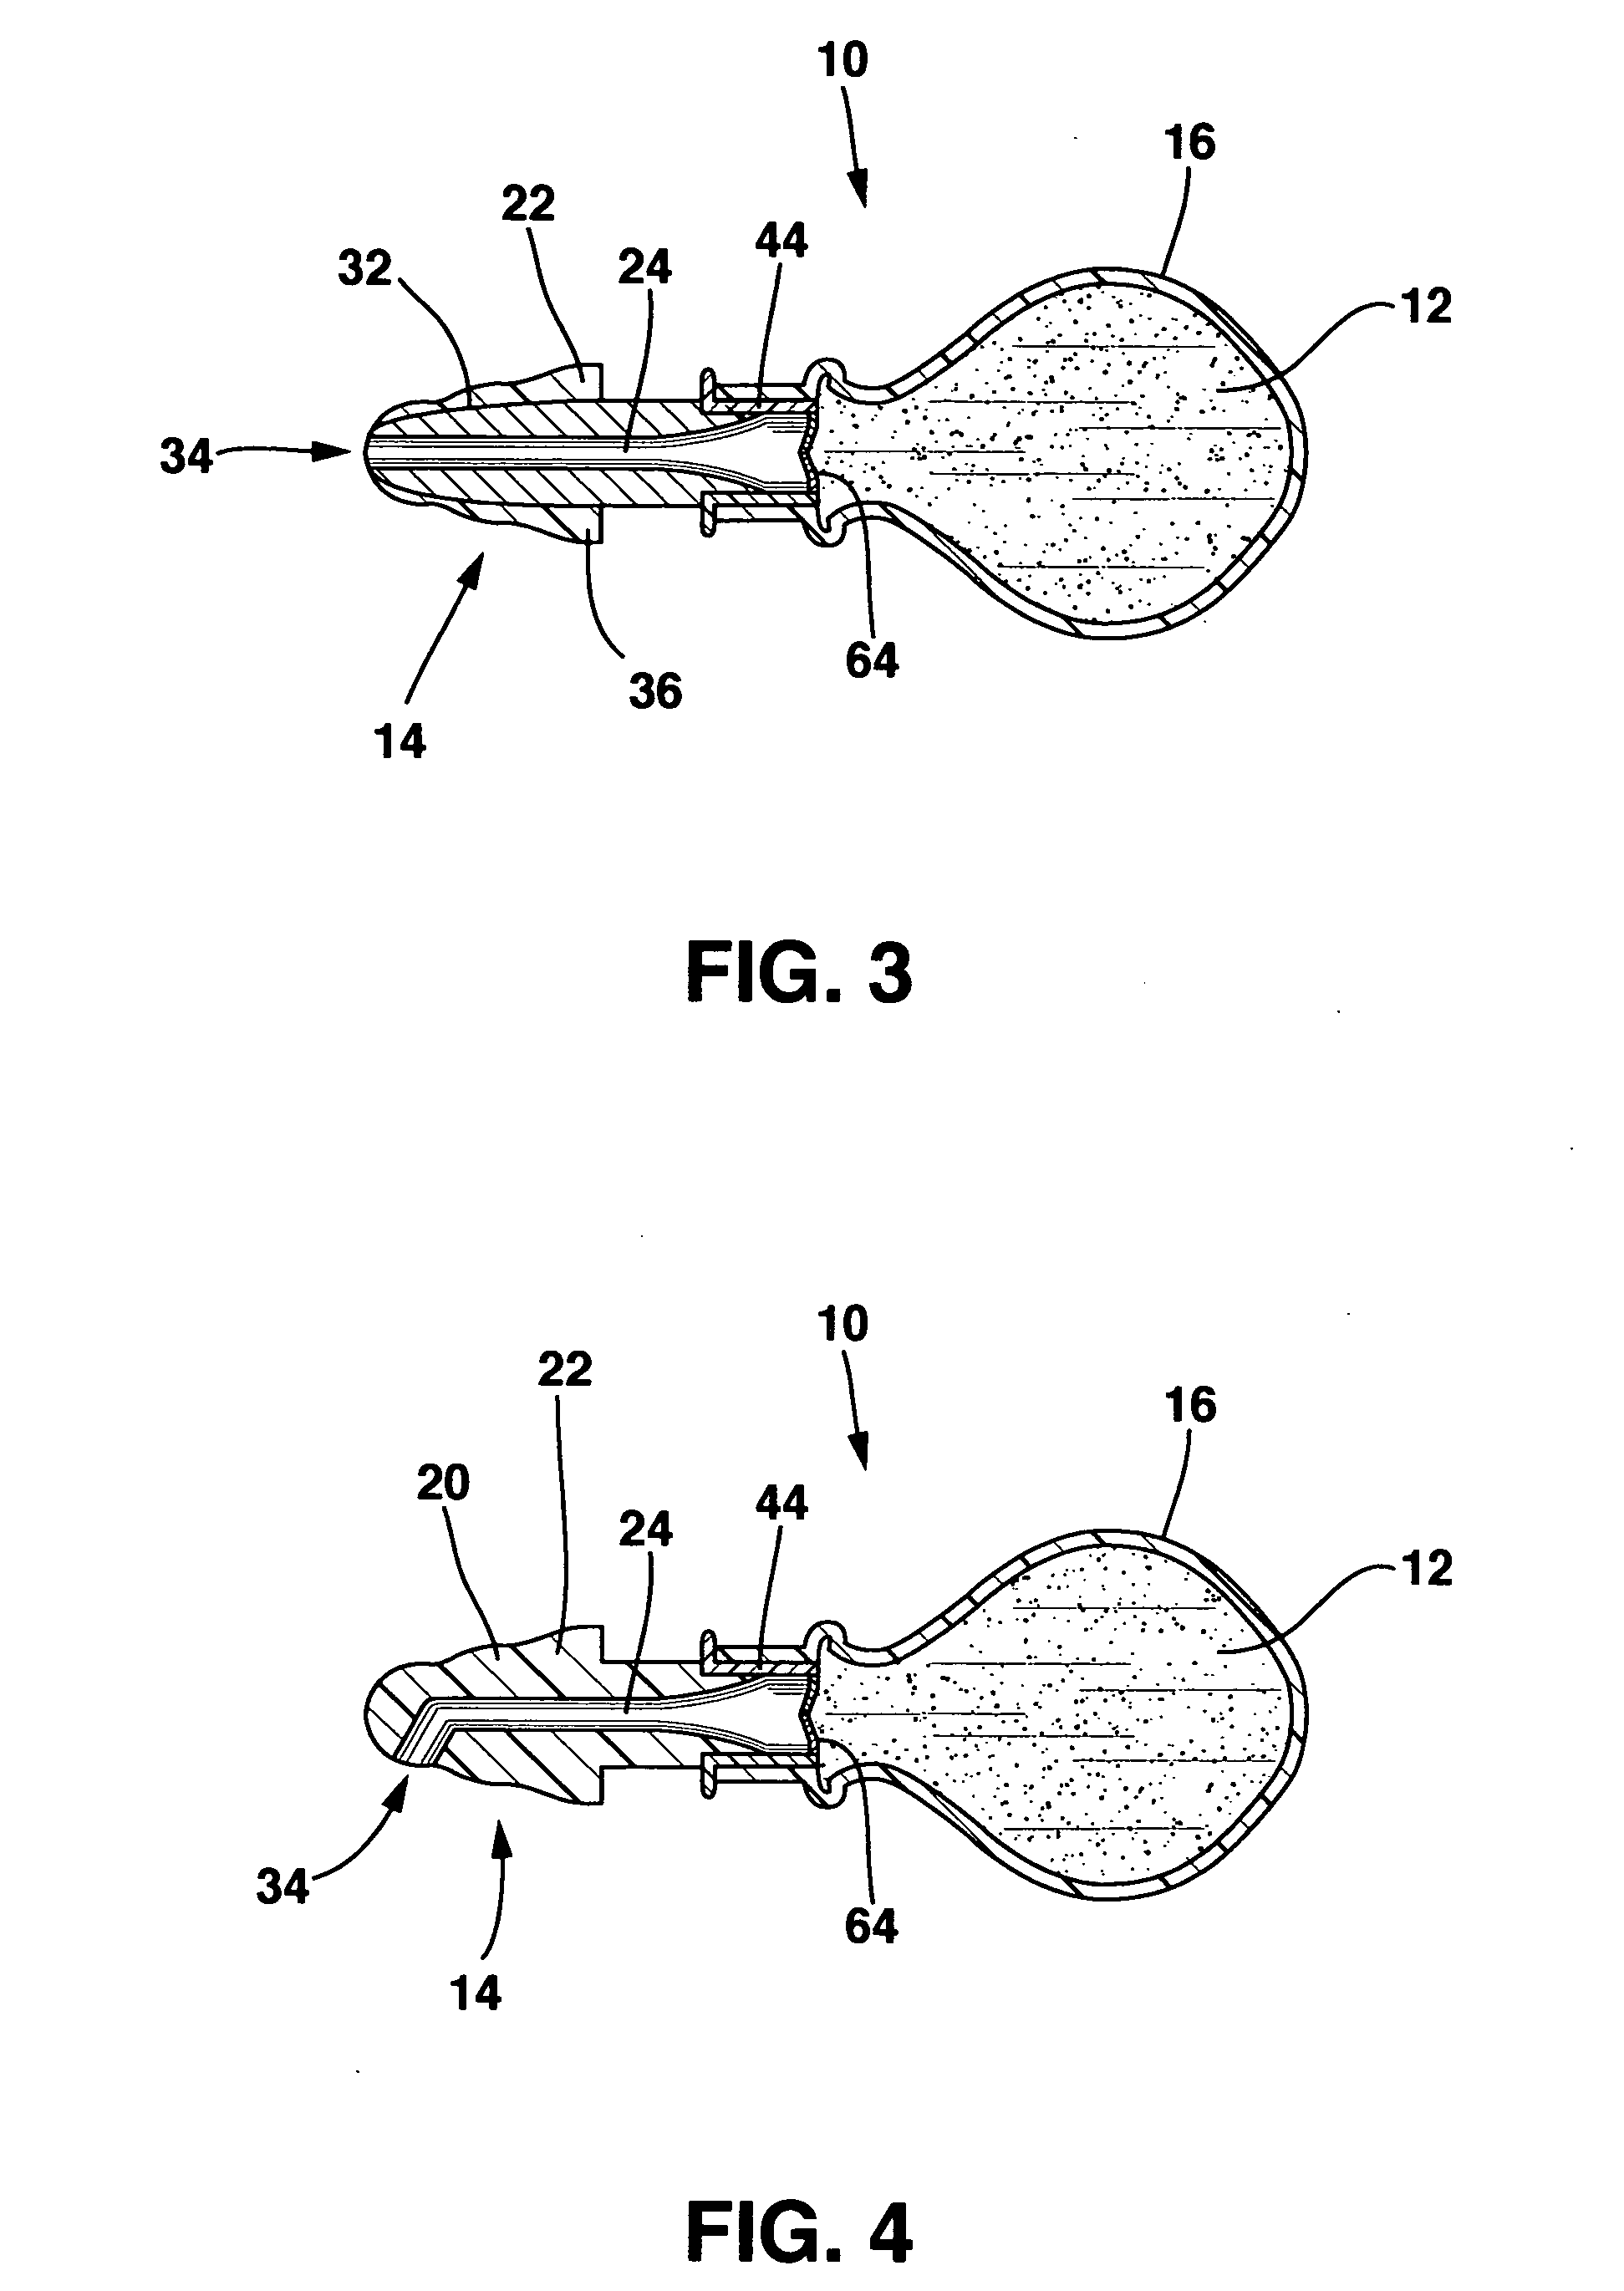 Medication delivery device